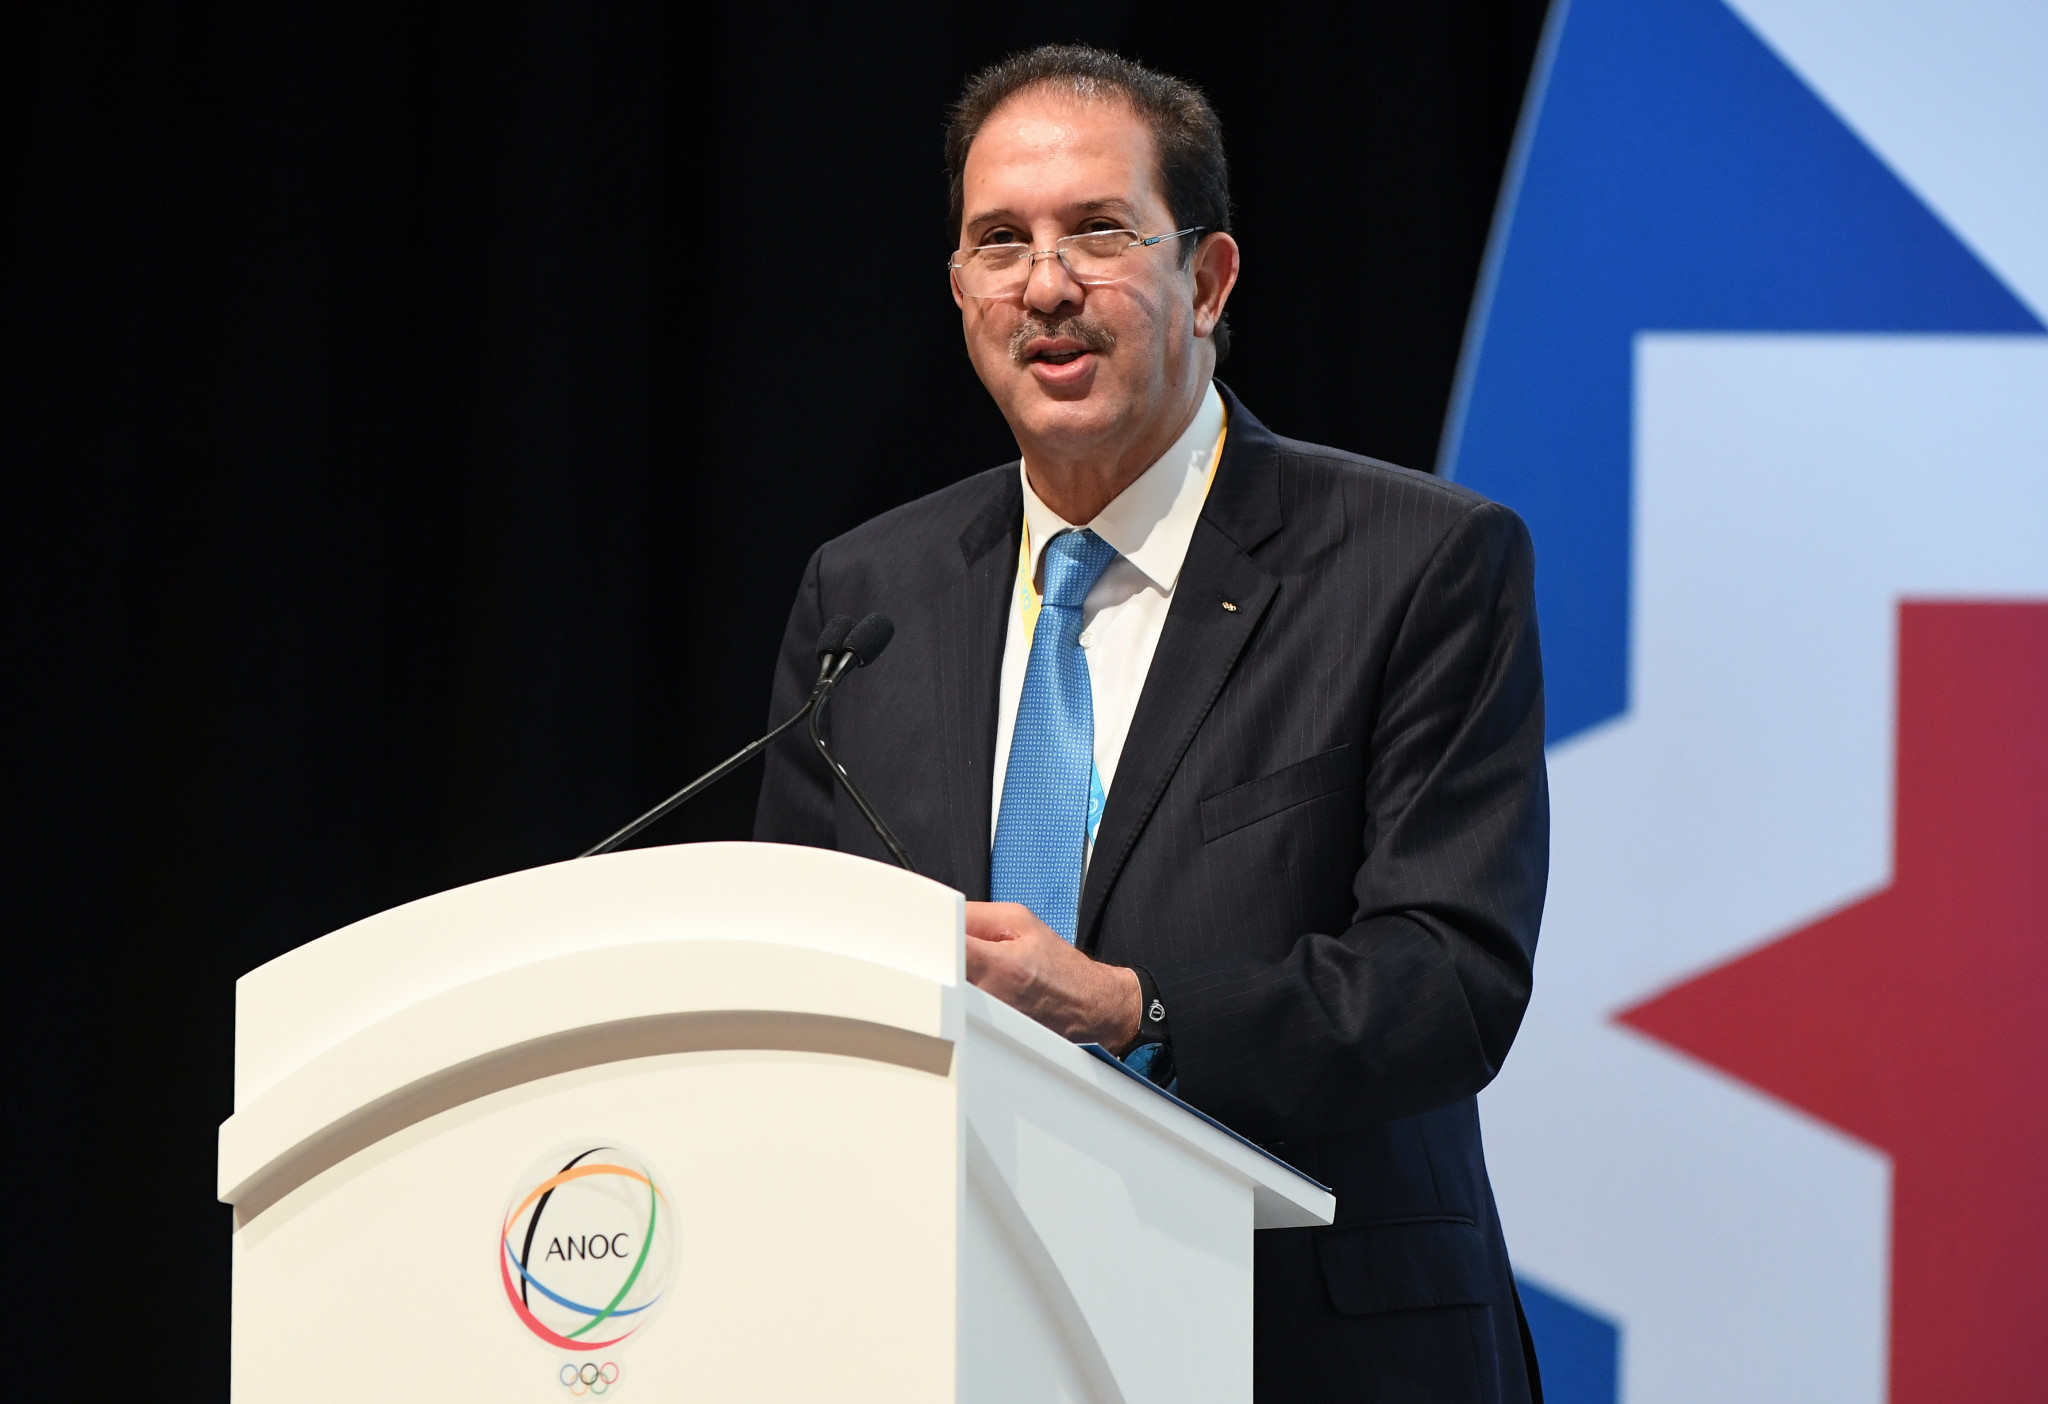 Mustapha Berraf was re-elected as ANOCA President in May ©Getty Images